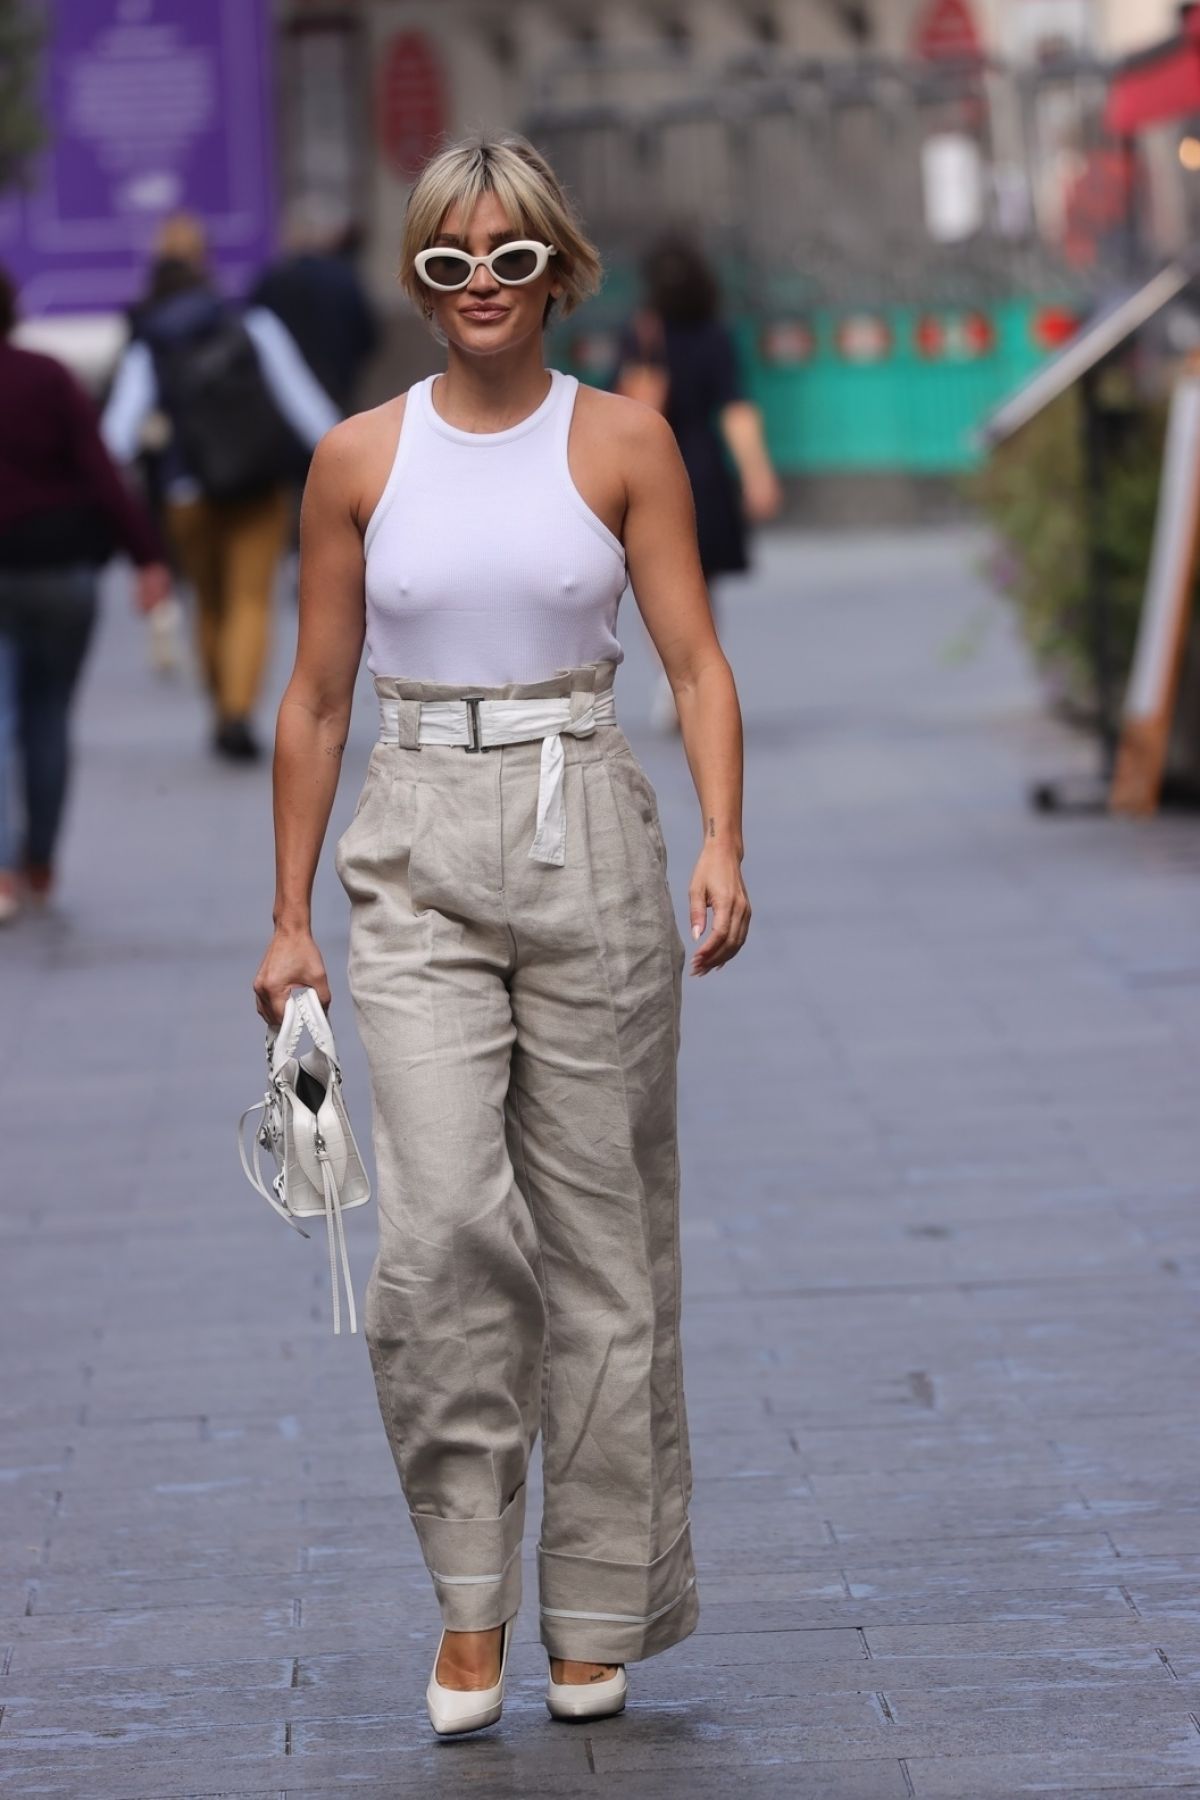 Ashley Roberts in White Top and Cargo Pants at Heart Breakfast Show in London 7